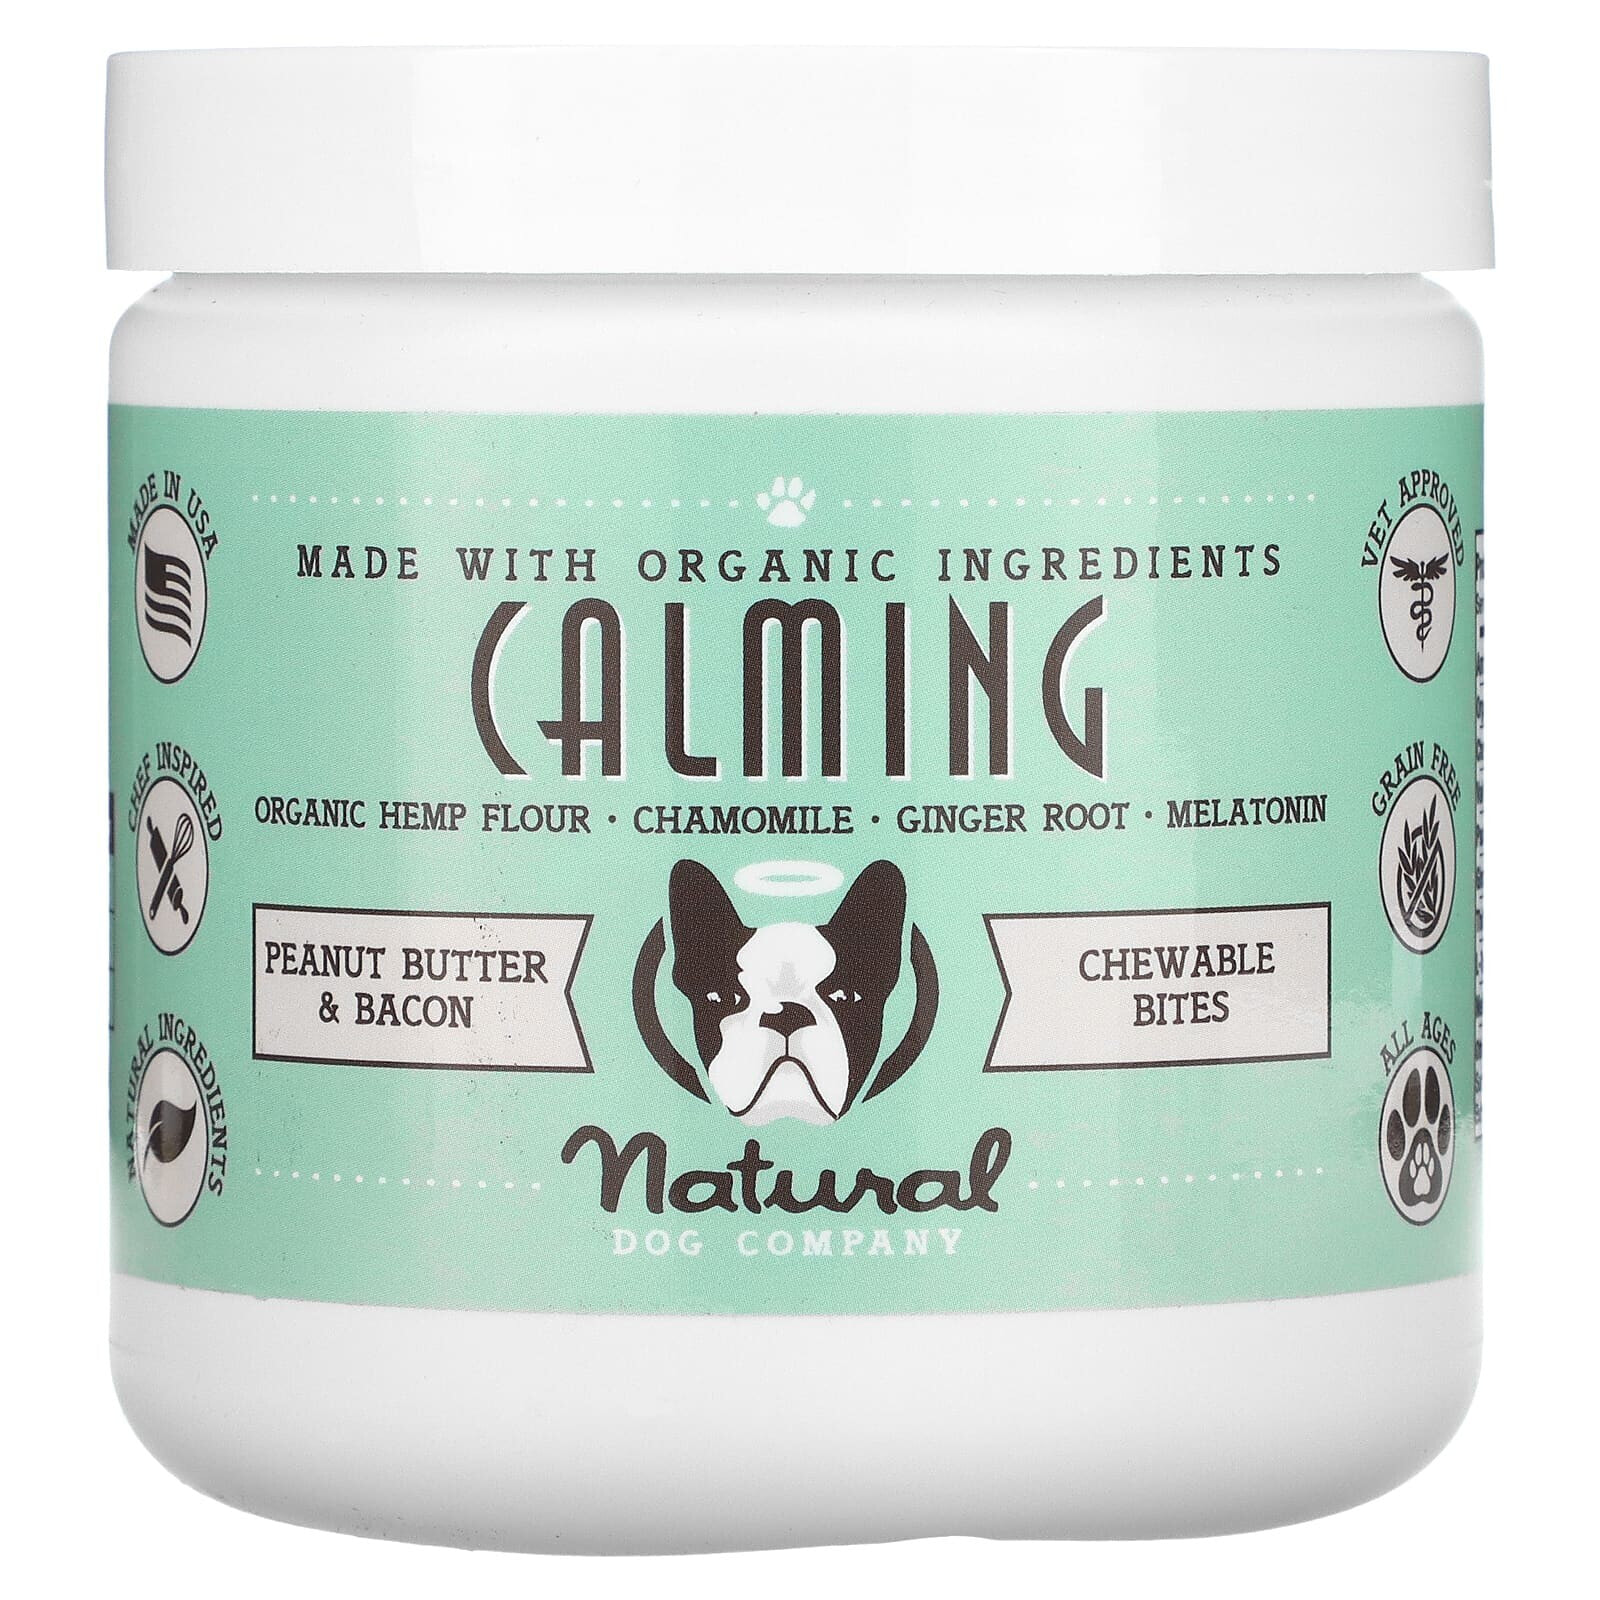 Natural Dog Company, Calming Chewable Bites, All Ages, Peanut Butter & Bacon, 10 oz (284 g)